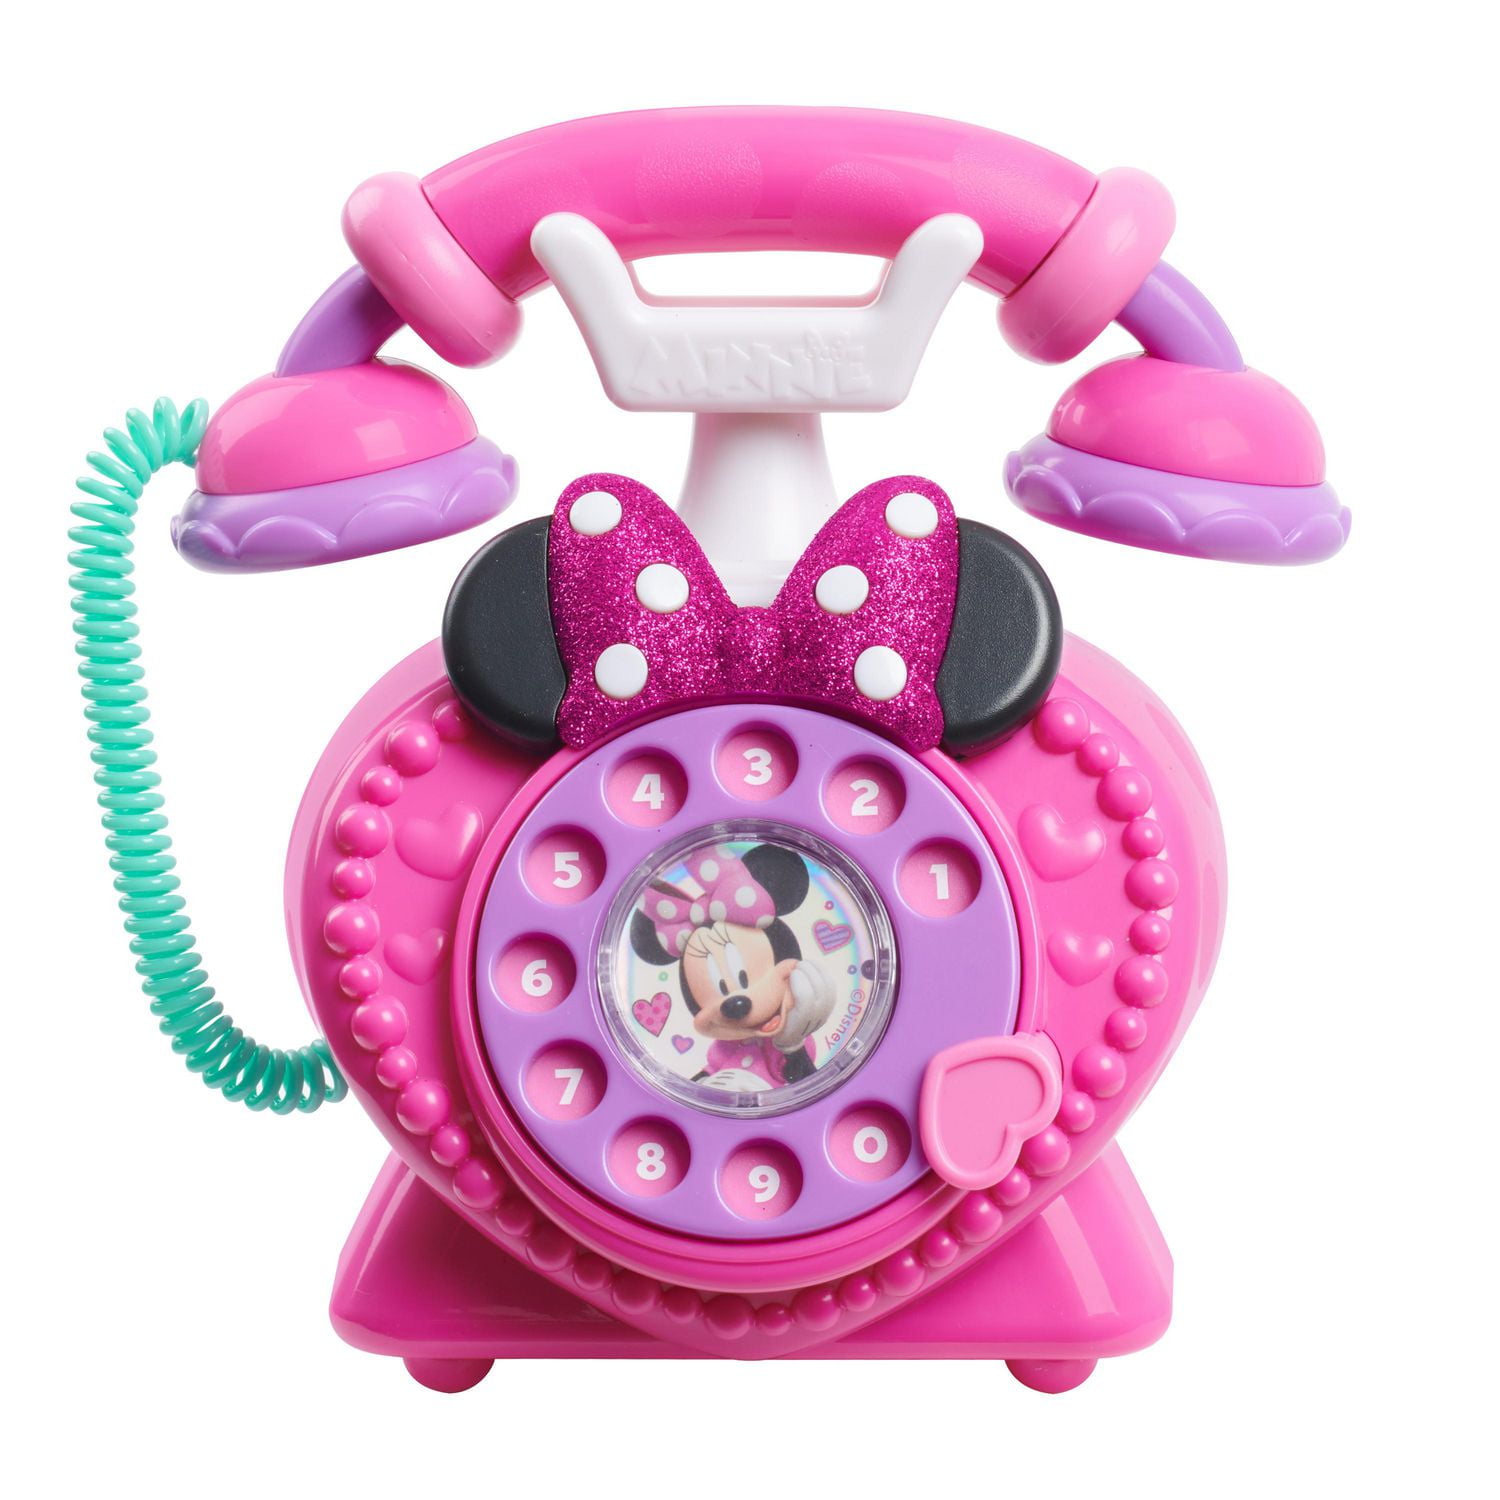 Disney Junior Minnie Mouse Ring Me Rotary Phone with Lights and